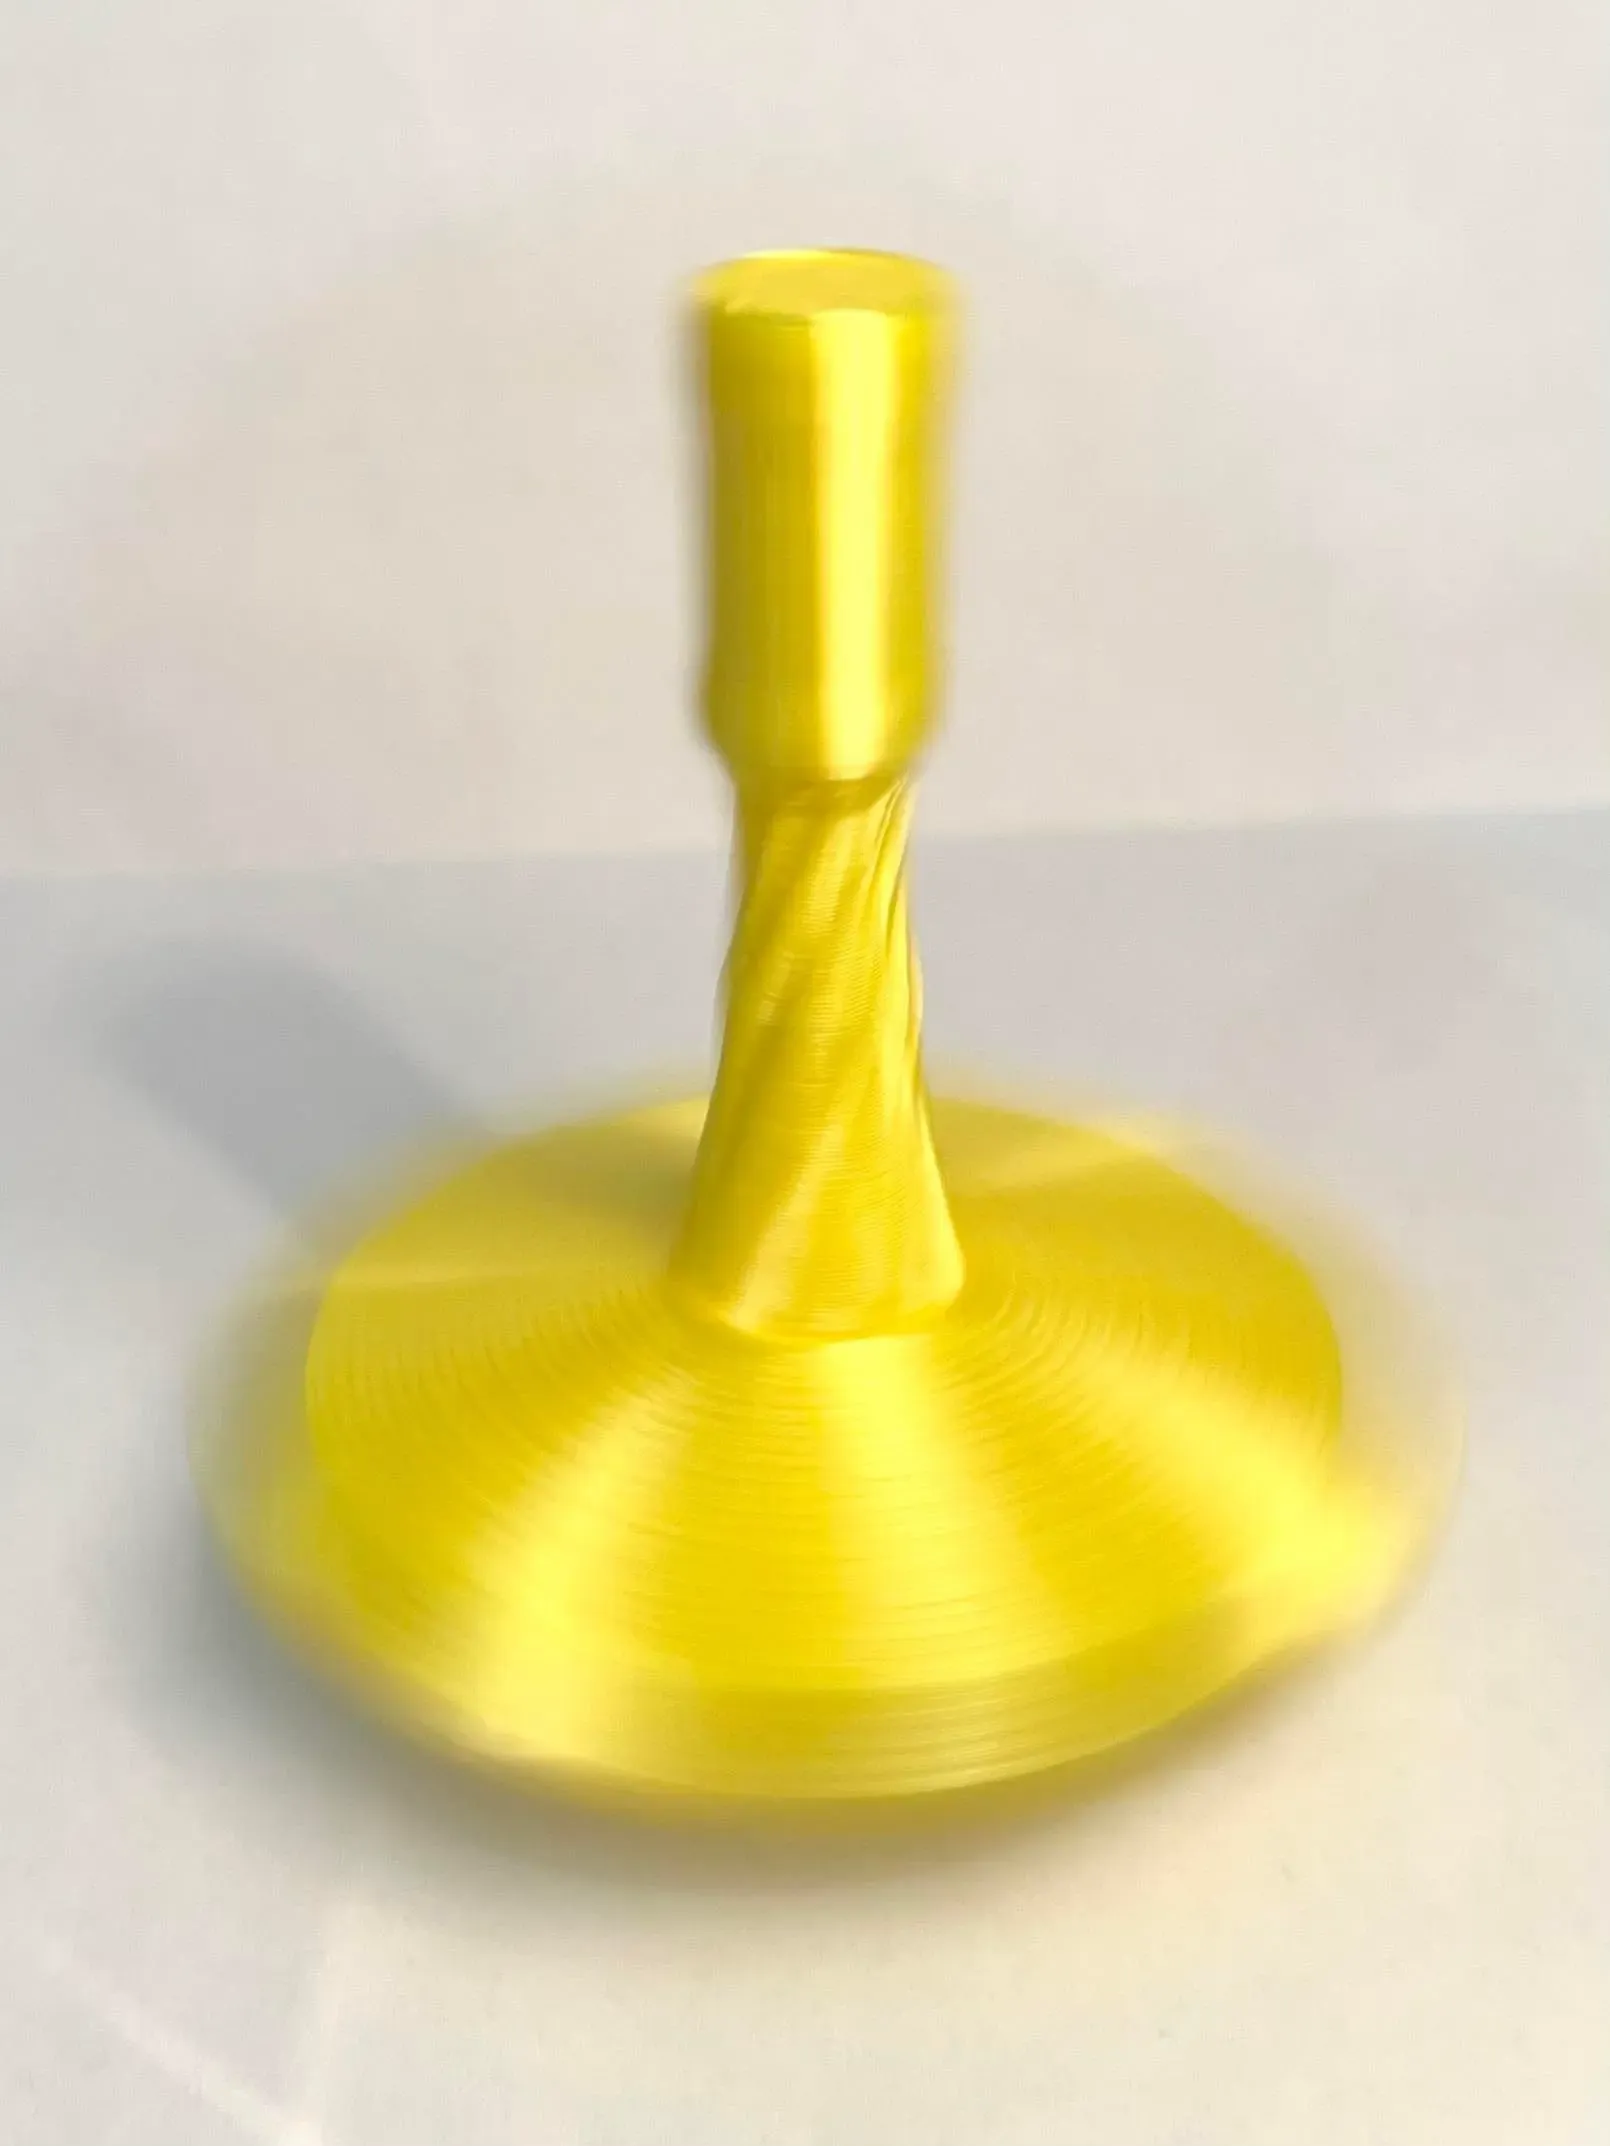 Spin top toy